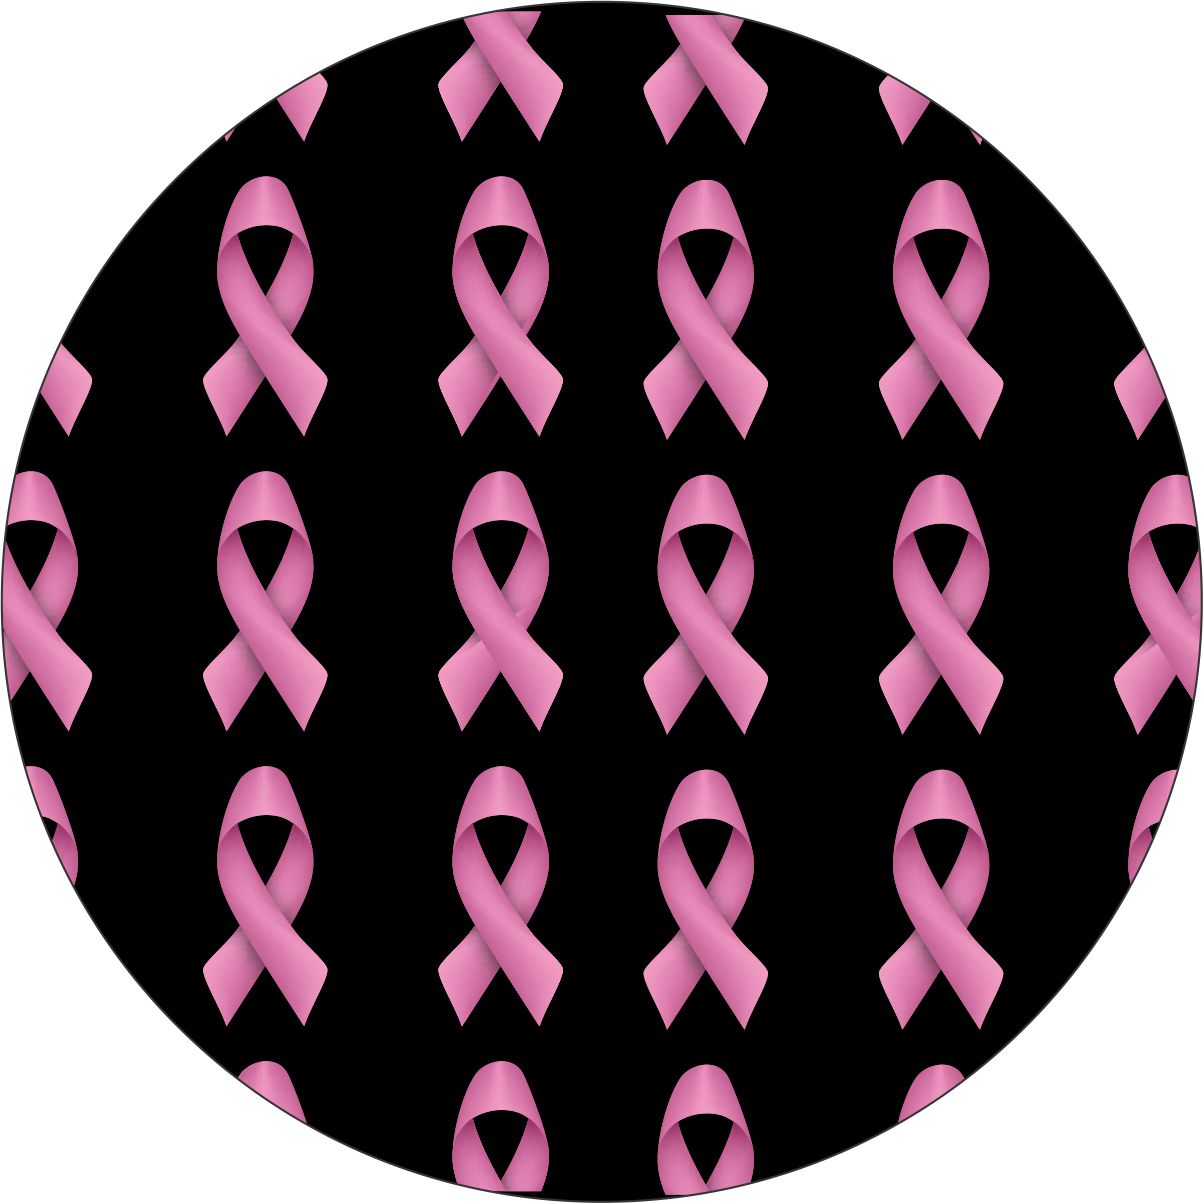 Black vinyl spare tire cover with a pattern of small pink ribbons to support breast cancer awareness